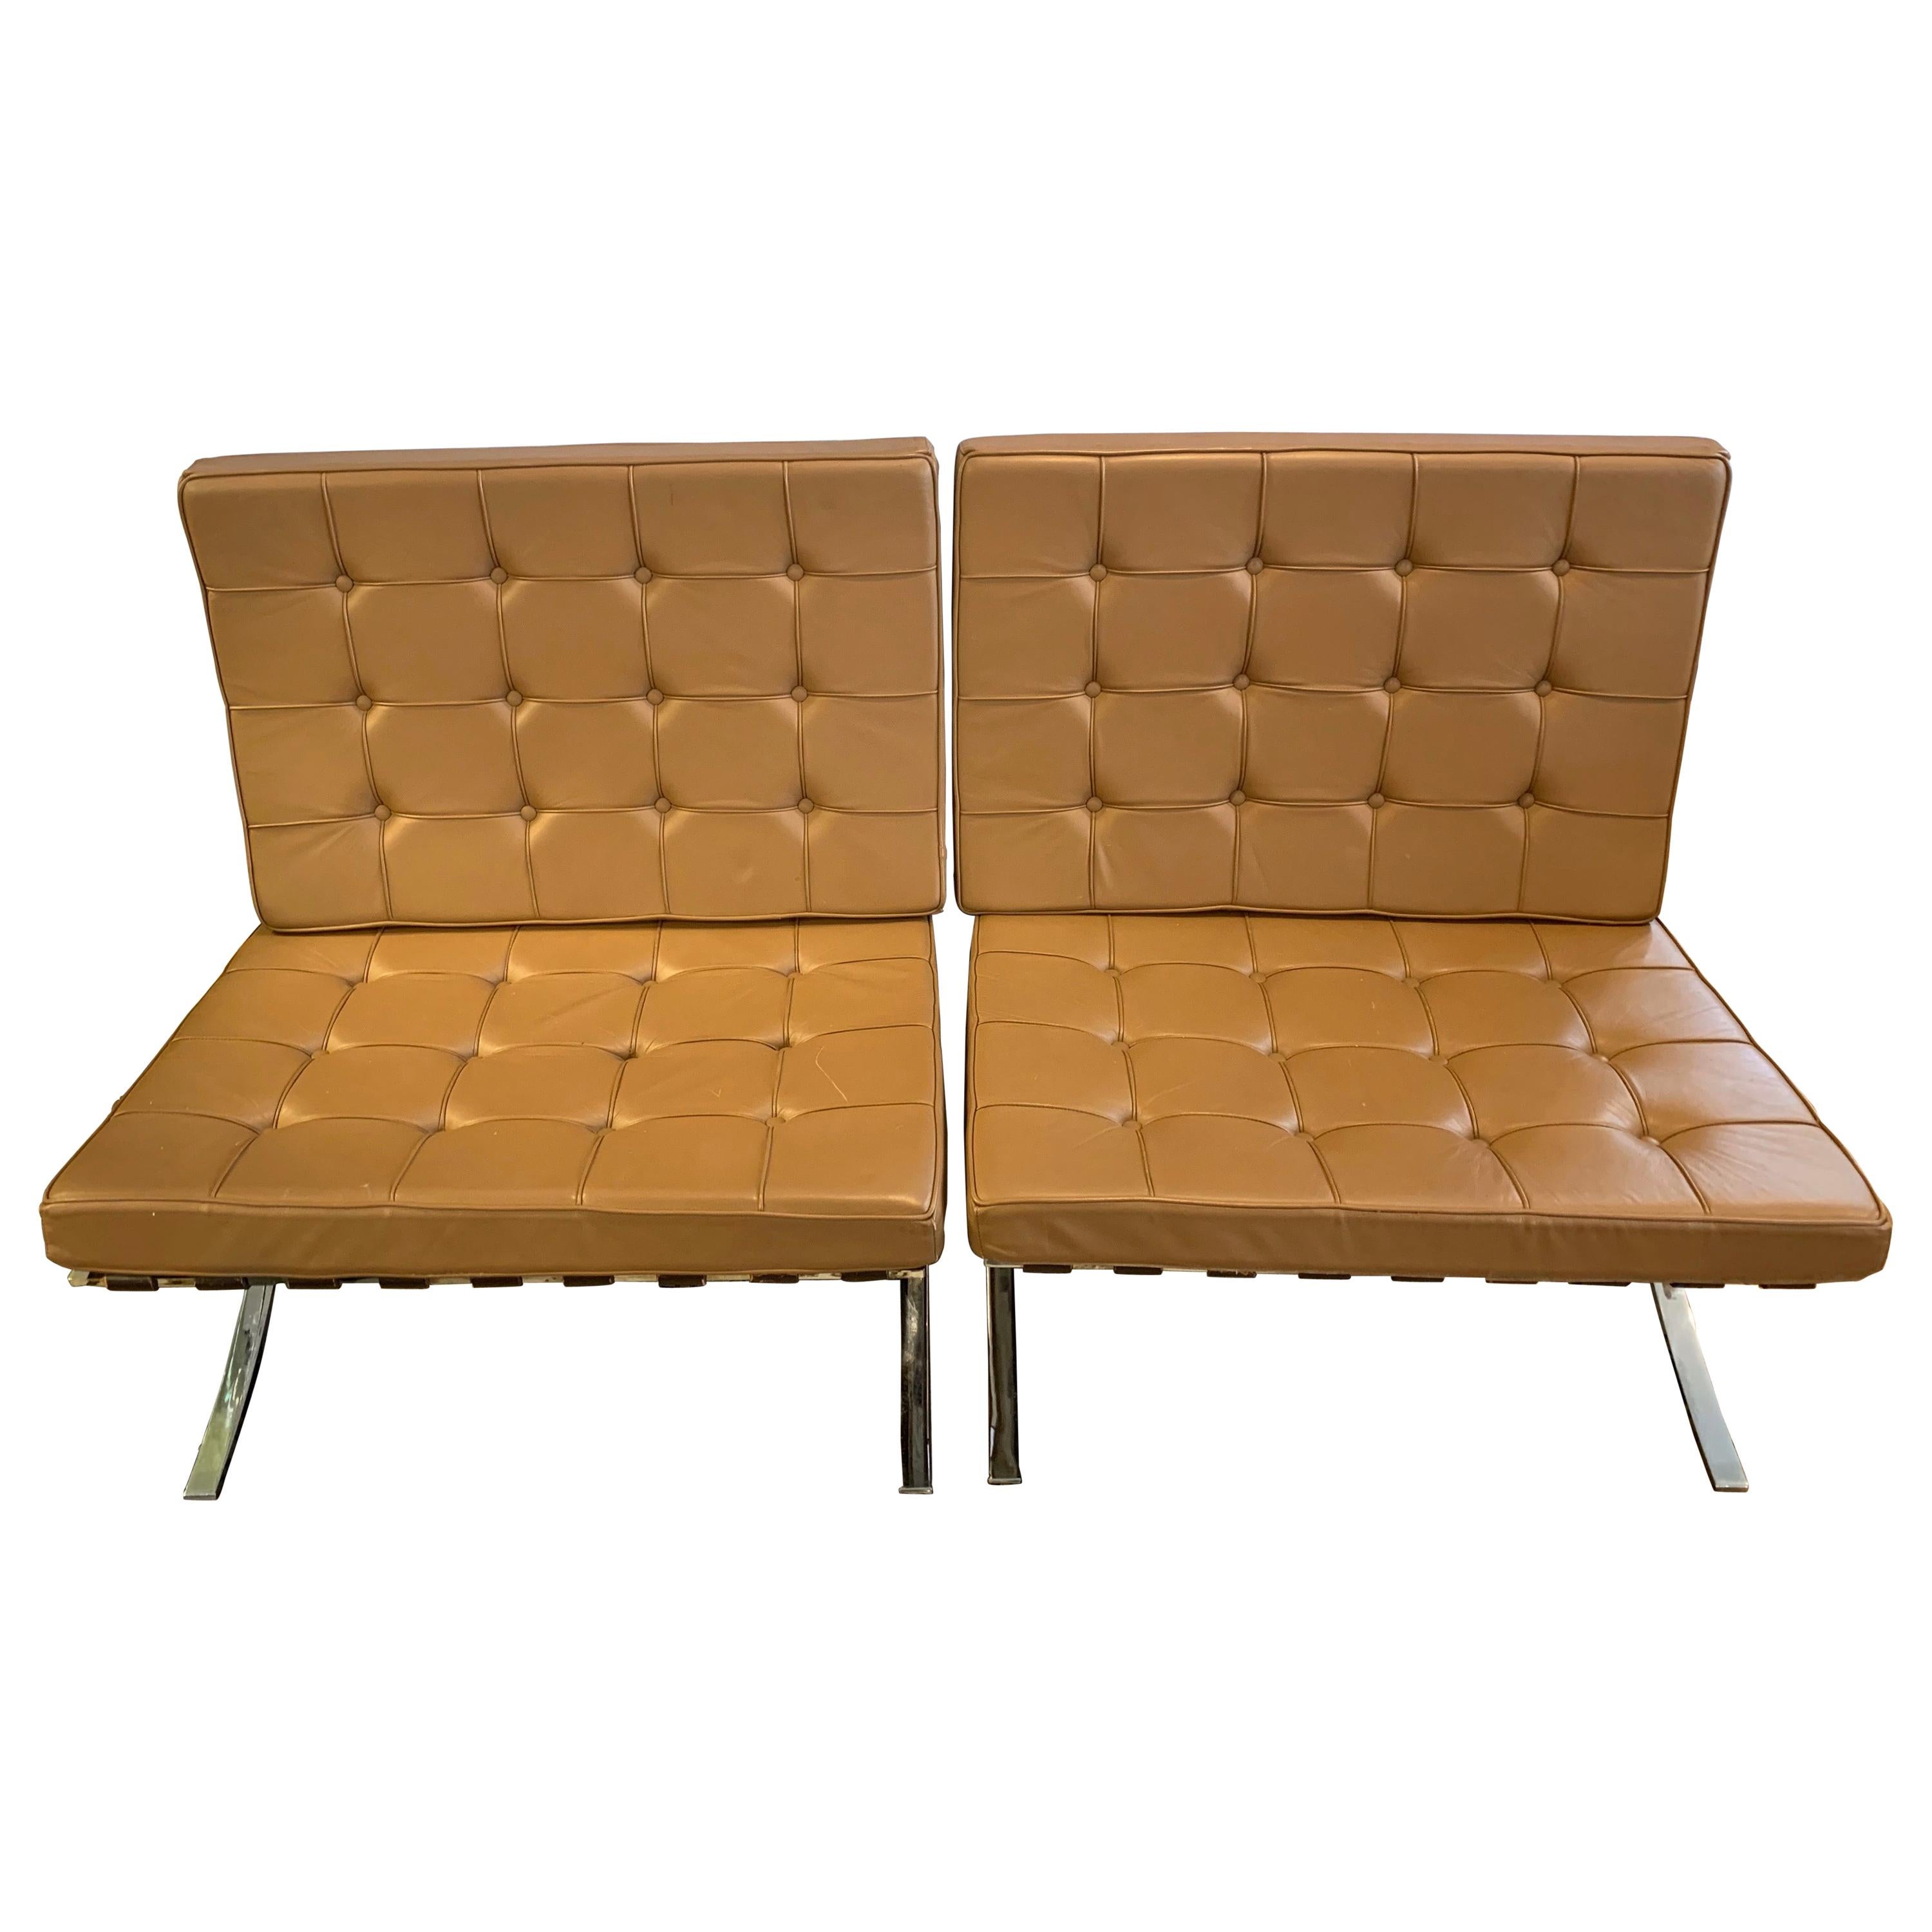 Pair of Ludwig Mies van der Rohe Light Brown Leather Barcelona Chairs